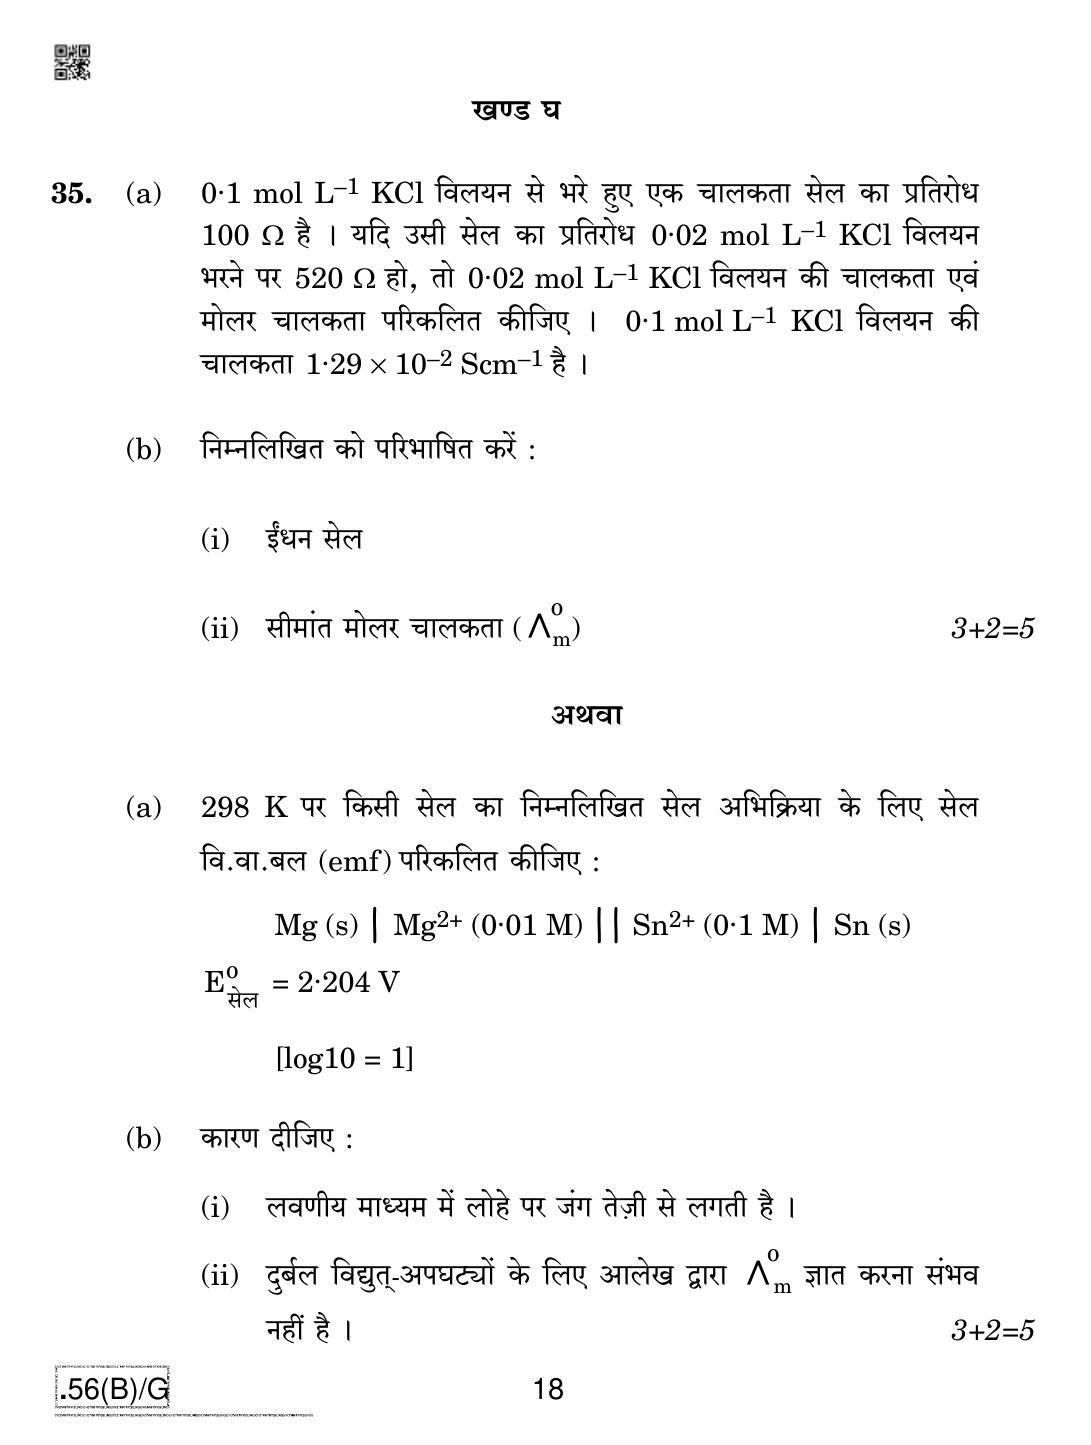 CBSE Class 12 56(B)-C - Chemistry For Blind Candidates 2020 Compartment Question Paper - Page 18